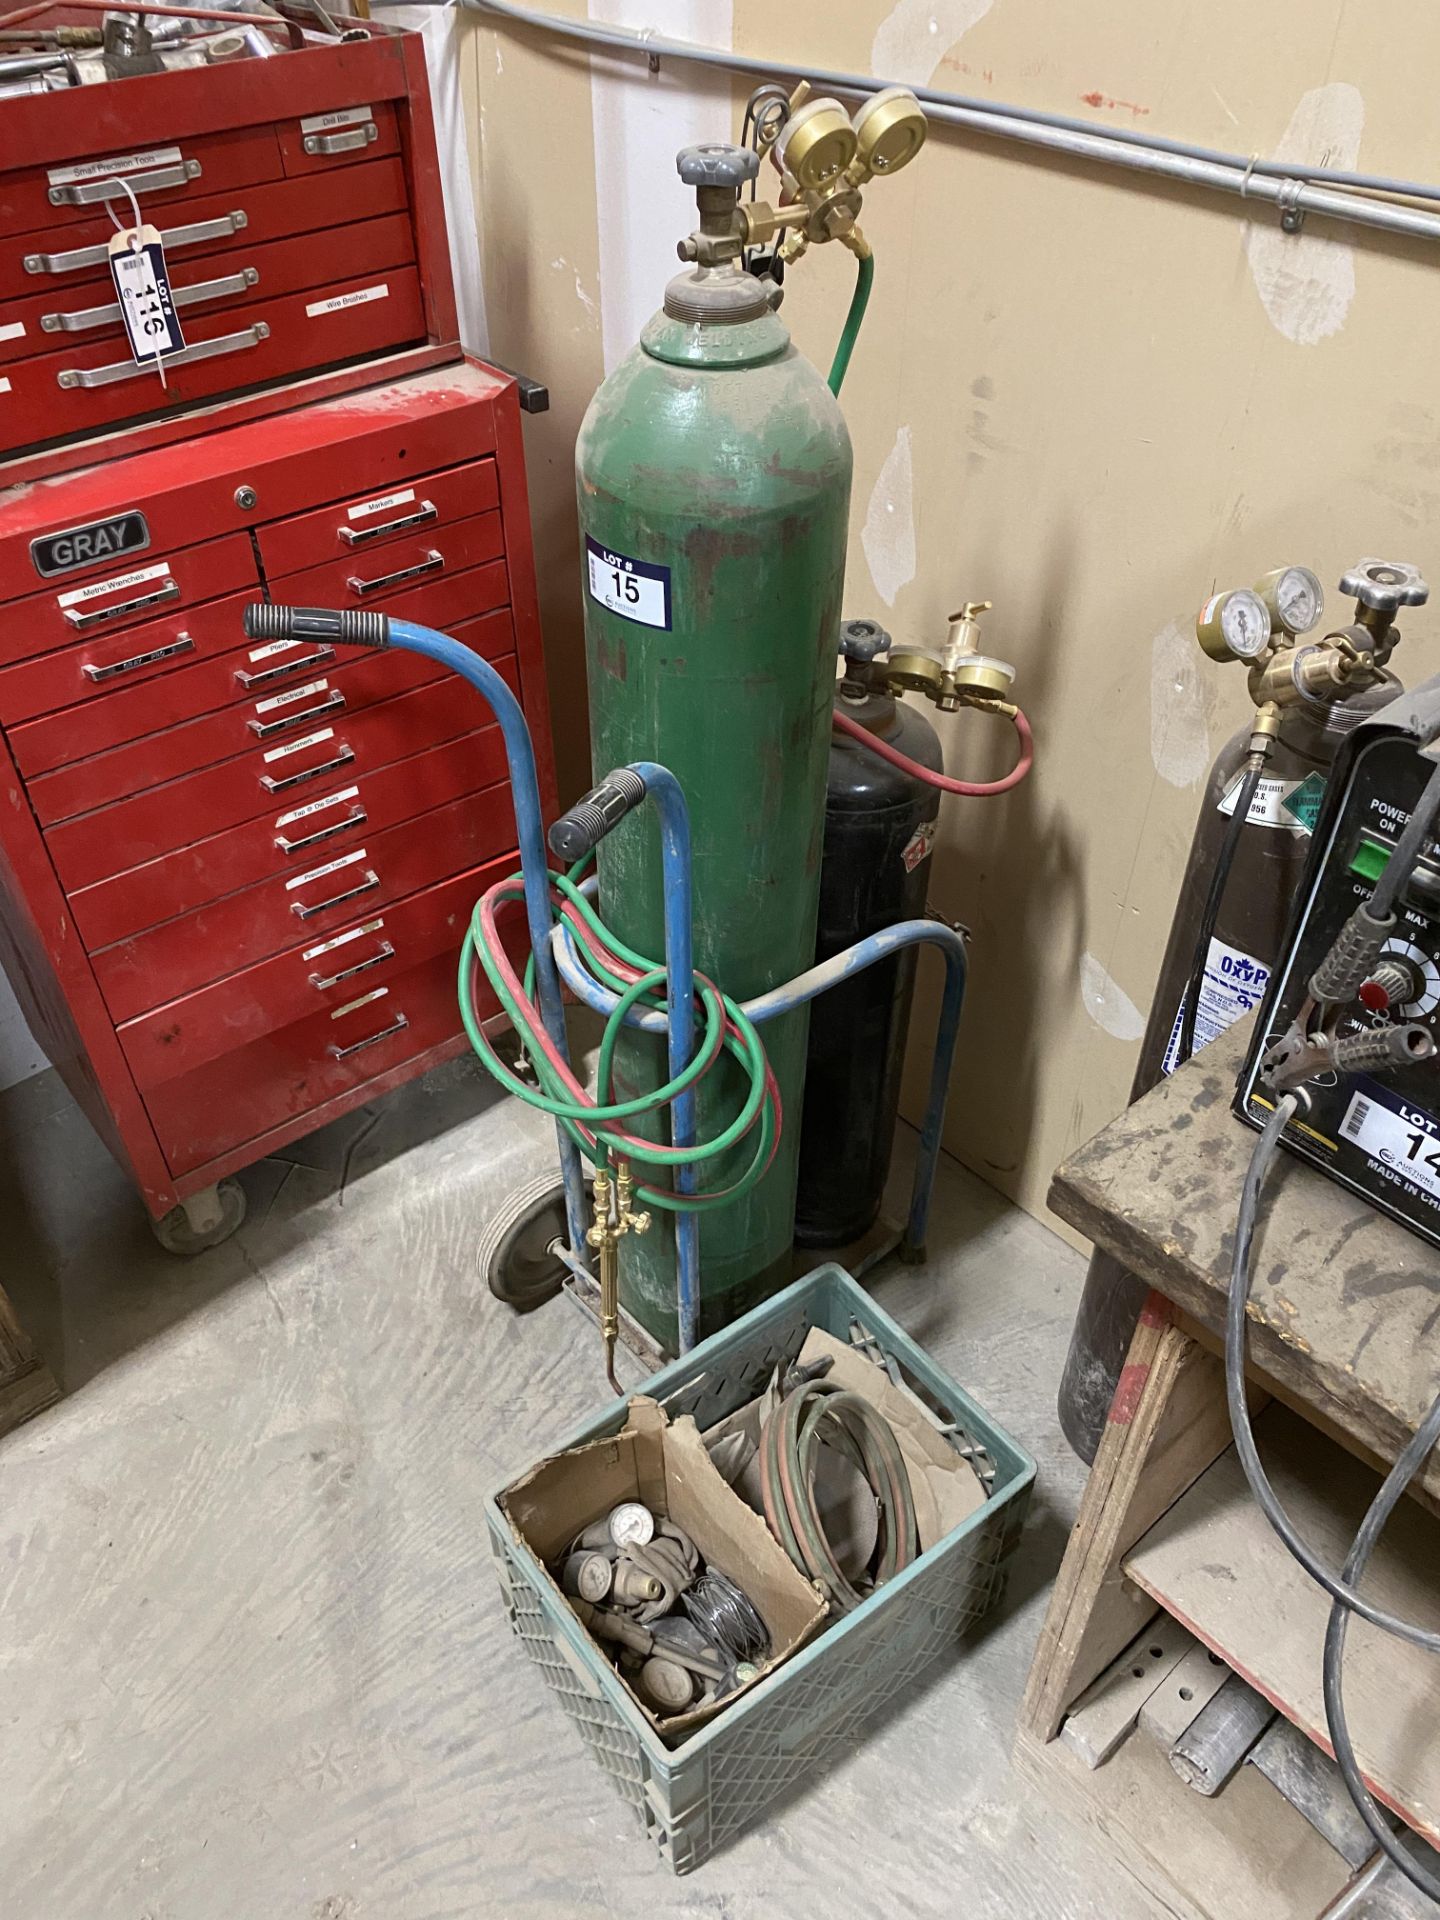 Lot of Oxy/Acetylene Cart w/ Gauges, Torches, Hoses, Bottles, etc.